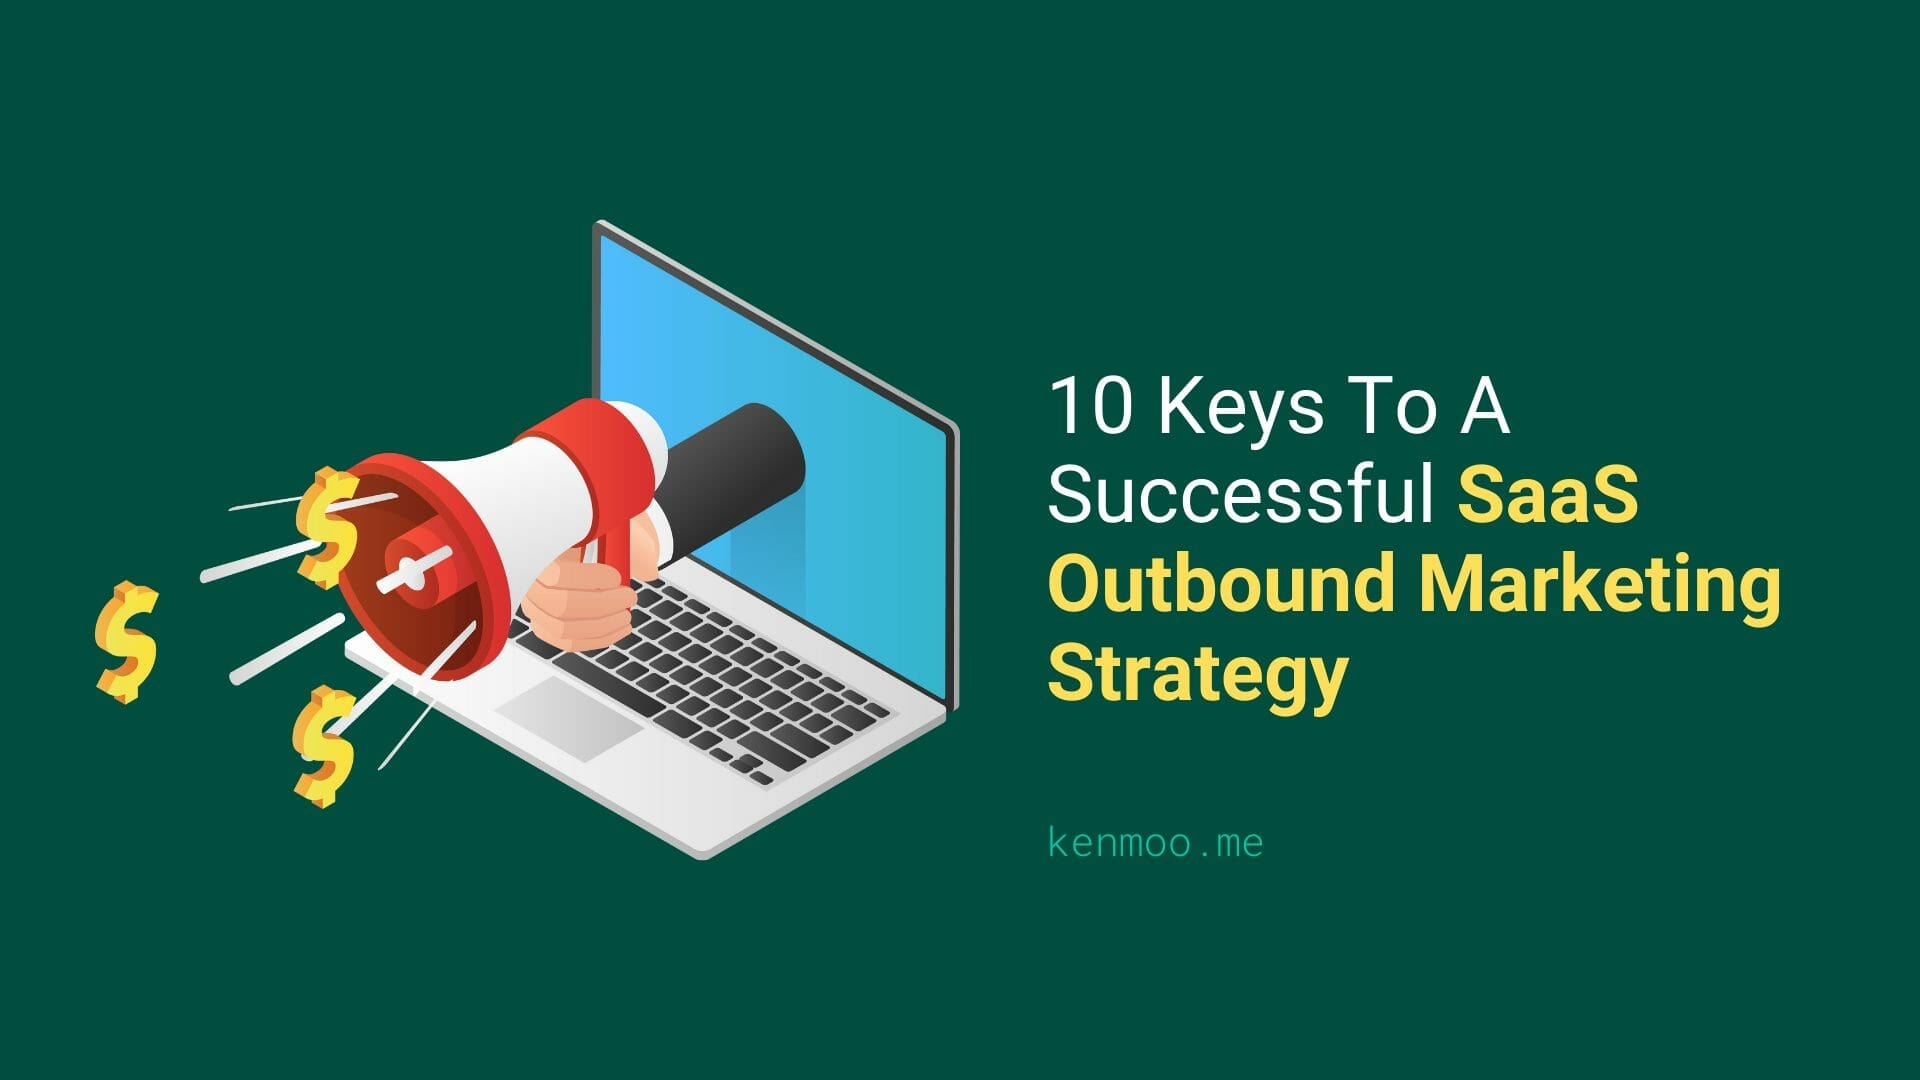 10 Keys To A Successful SaaS Outbound Marketing Strategy